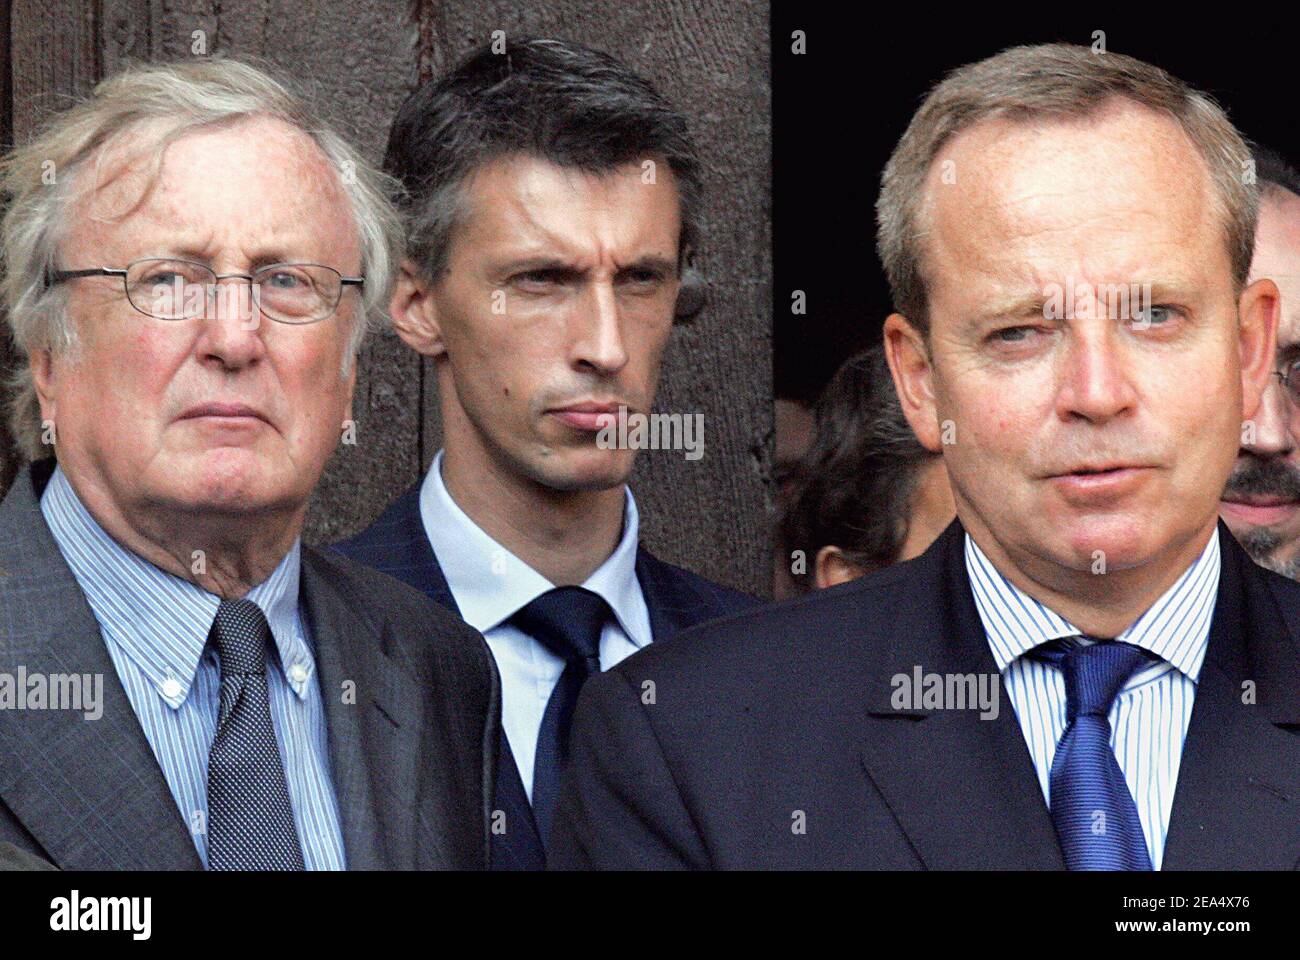 French actor Claude Rich (L) and French Minister of Culture Renaud Donnedieu de Vabres attend the funeral of the late French actor Jacques Dufilho held at the cathedral of Mirande, southwestern France, on August 31, 2005. Dufilho died on August 28 aged 91. Photo by Patrick Bernard/ABACAPRESS.COM. Stock Photo